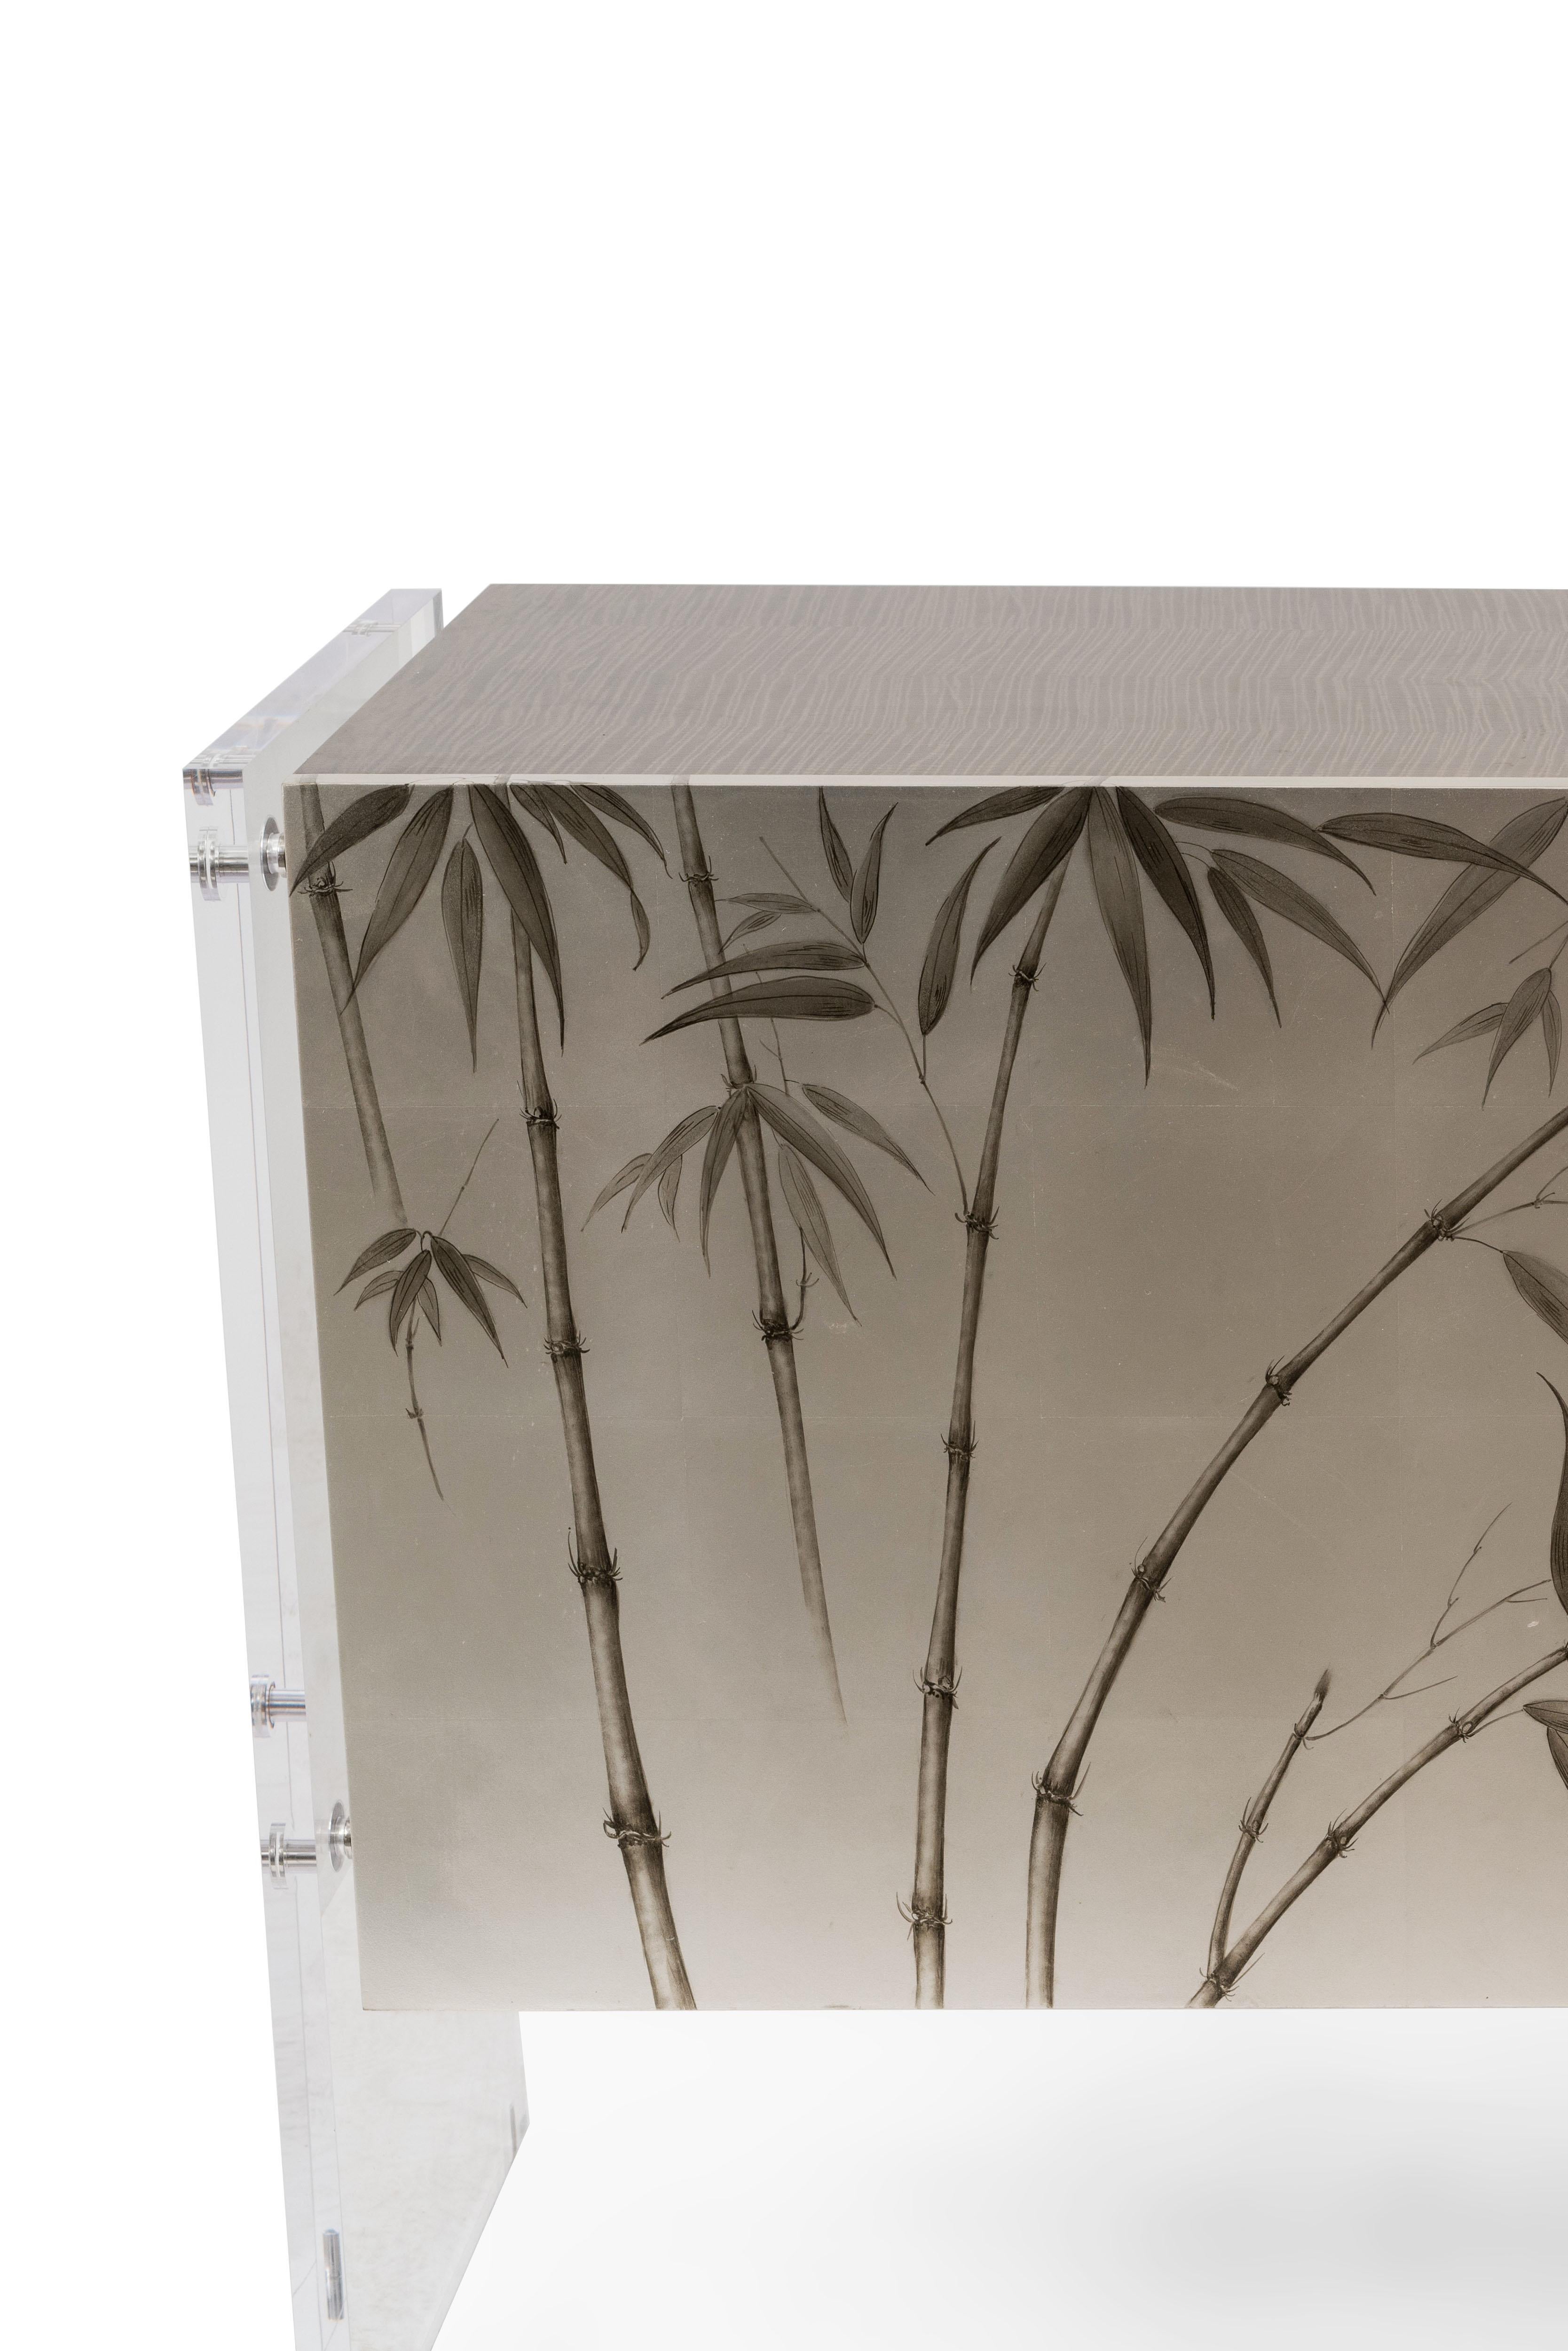 Contemporary silver/gray painted commode with bamboo floral design on the front doors and a gray wood veneer finished top. Sides supported on solid Lucite panels with silver metal detail. (THEODORE ALEXANDER).